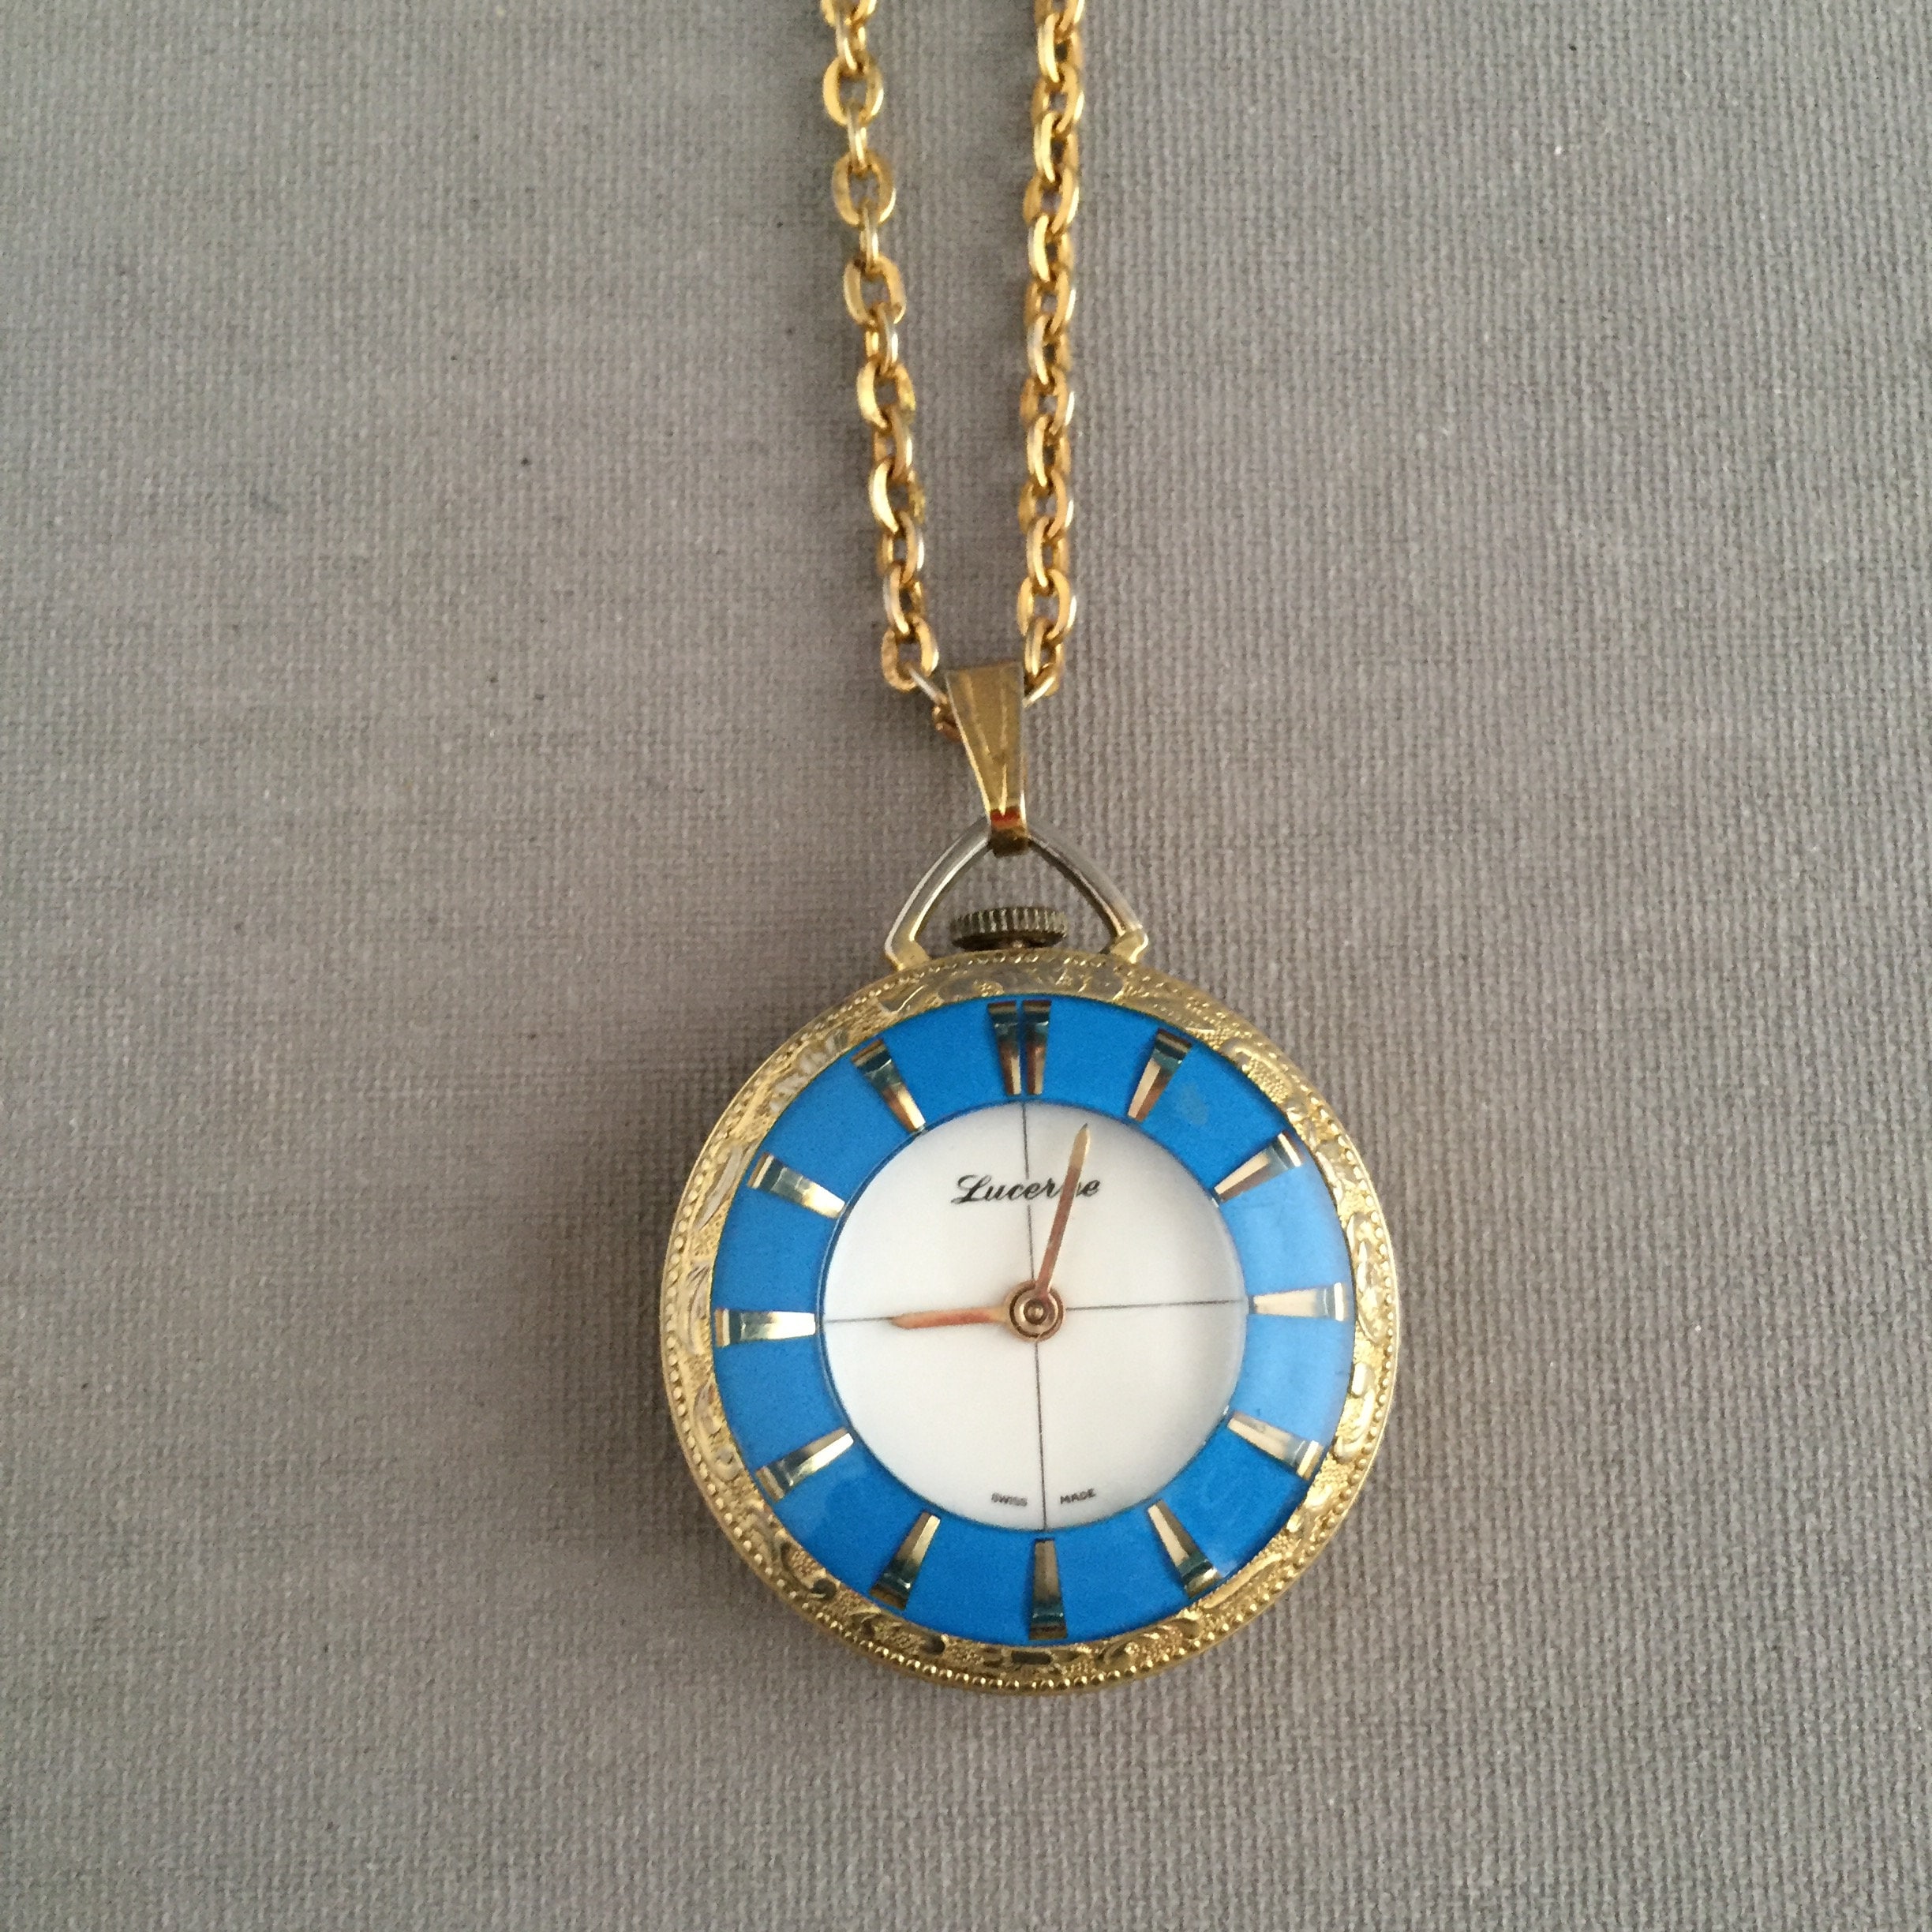 Lucerne Pendant Necklace Watch Vintage LUCERNE Swiss Movement Manual Wind  Gold Watch Necklace WORKS 1950s Lucerne Analog Wind up Watch - Etsy | Pendant  necklace, Watch necklace, Necklace